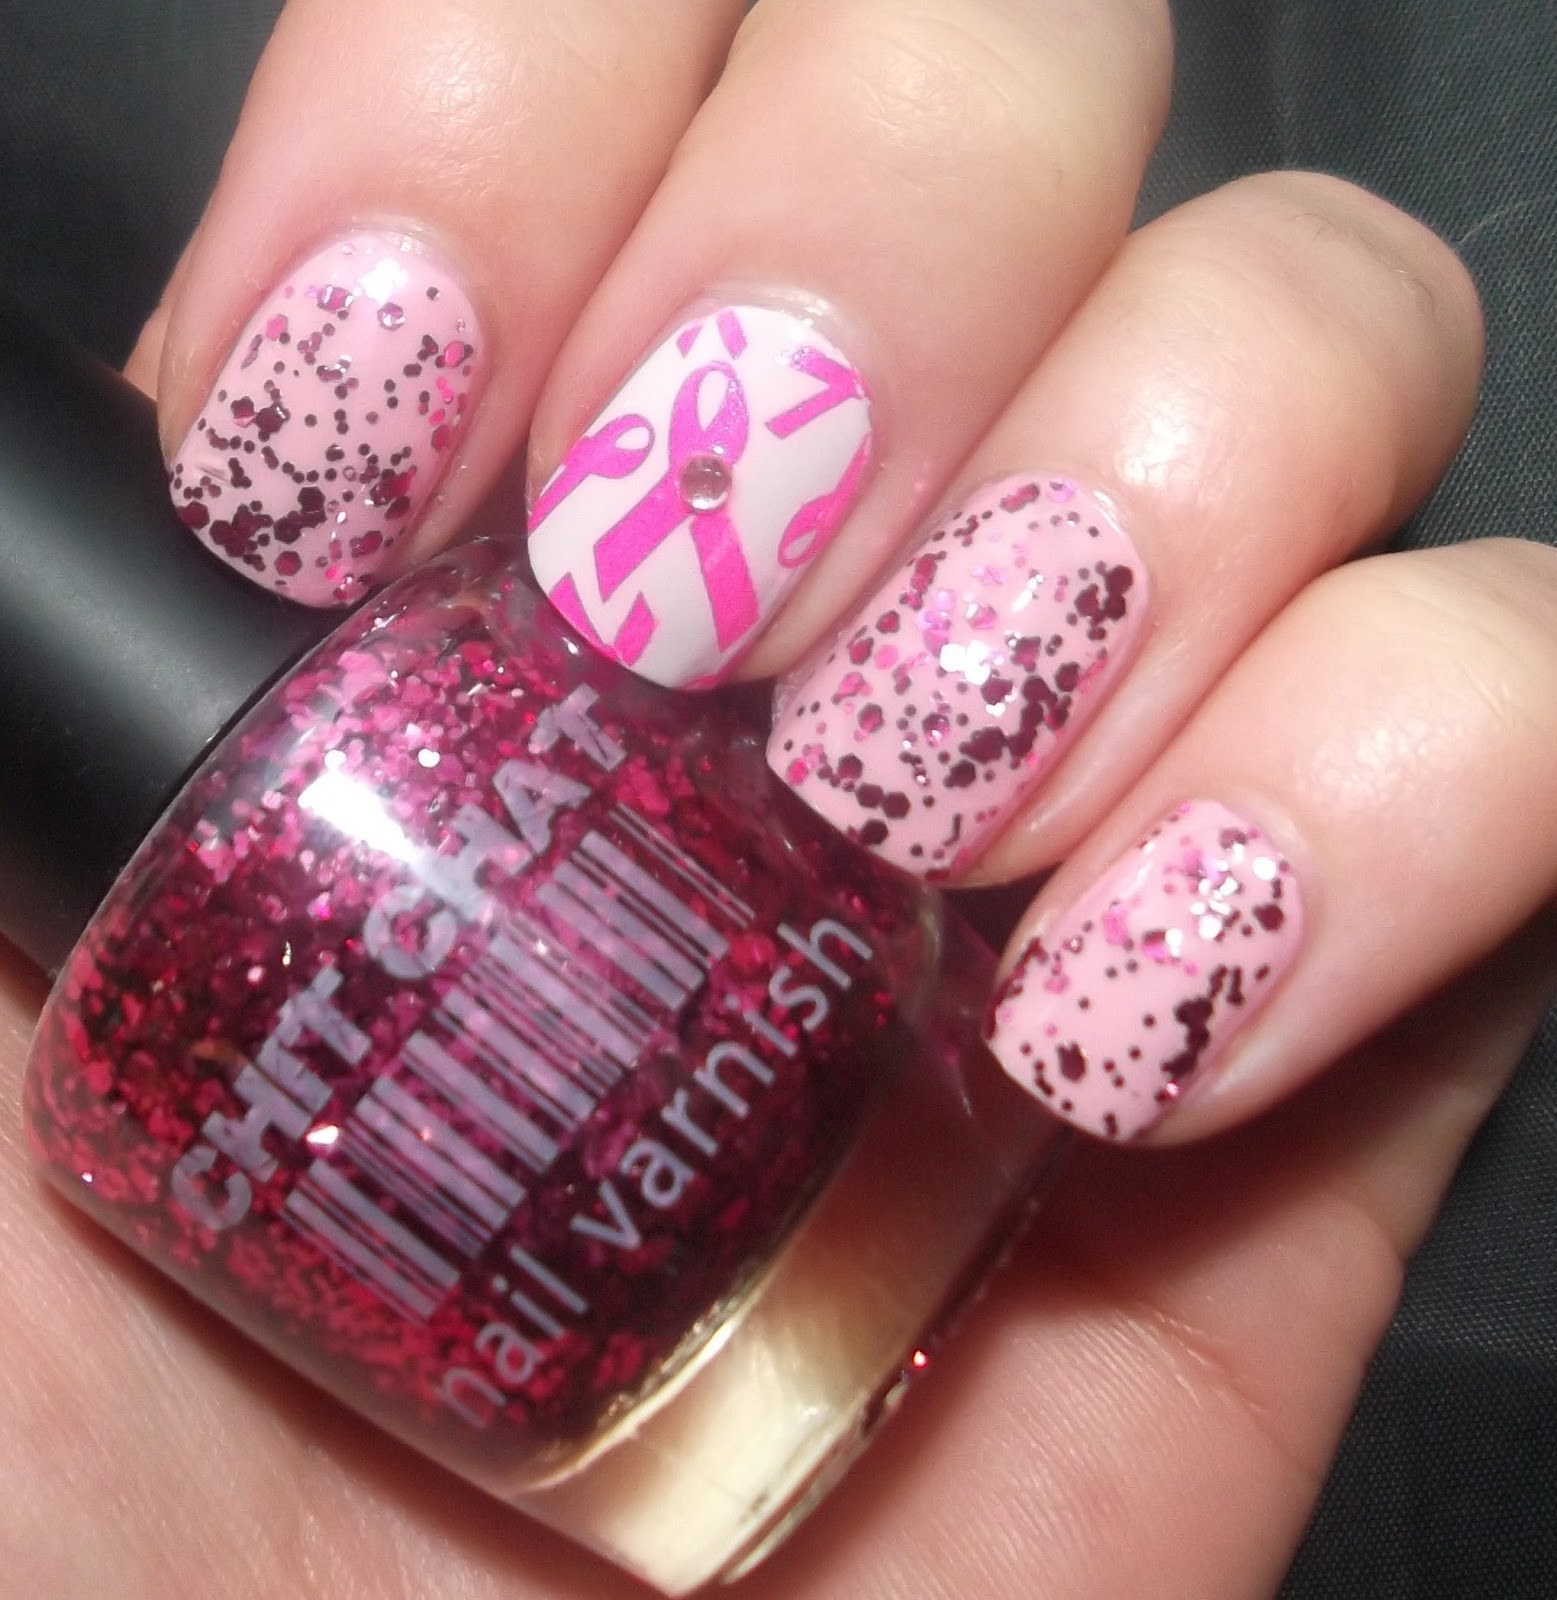 Breast Cancer Awareness Nail Designs
 Lou is Perfectly Polished Breast Cancer Awareness Nail Art